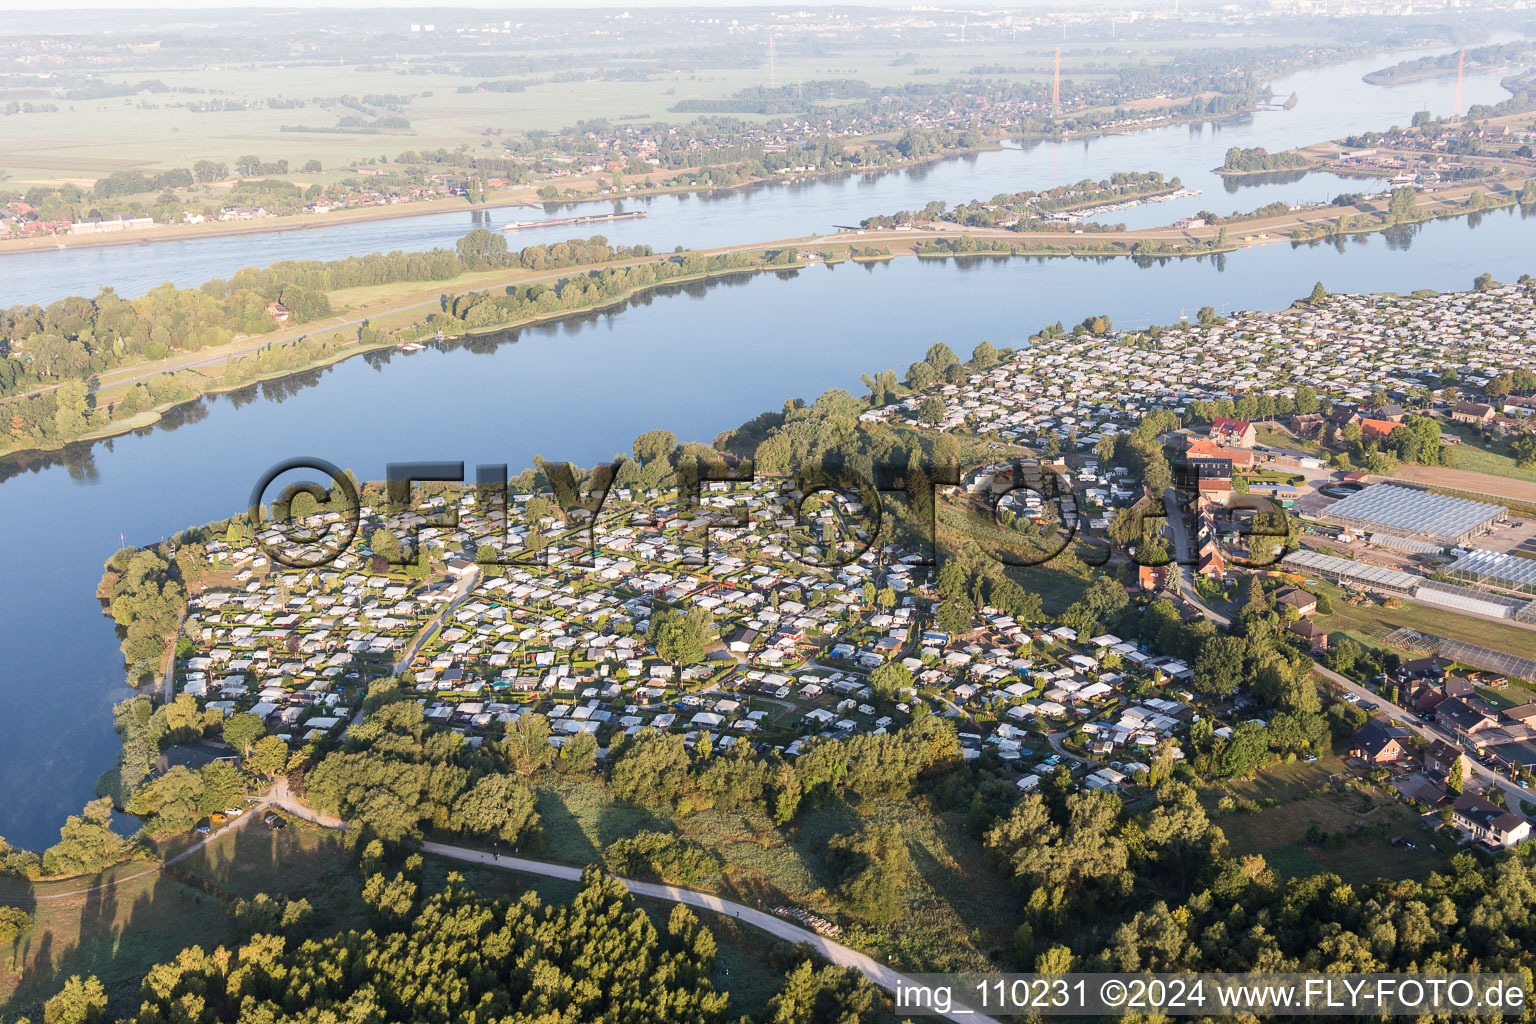 Aerial view of Camping with caravans and tents on the Elbe dyke in the district Ochsenwerder in Hamburg, Germany